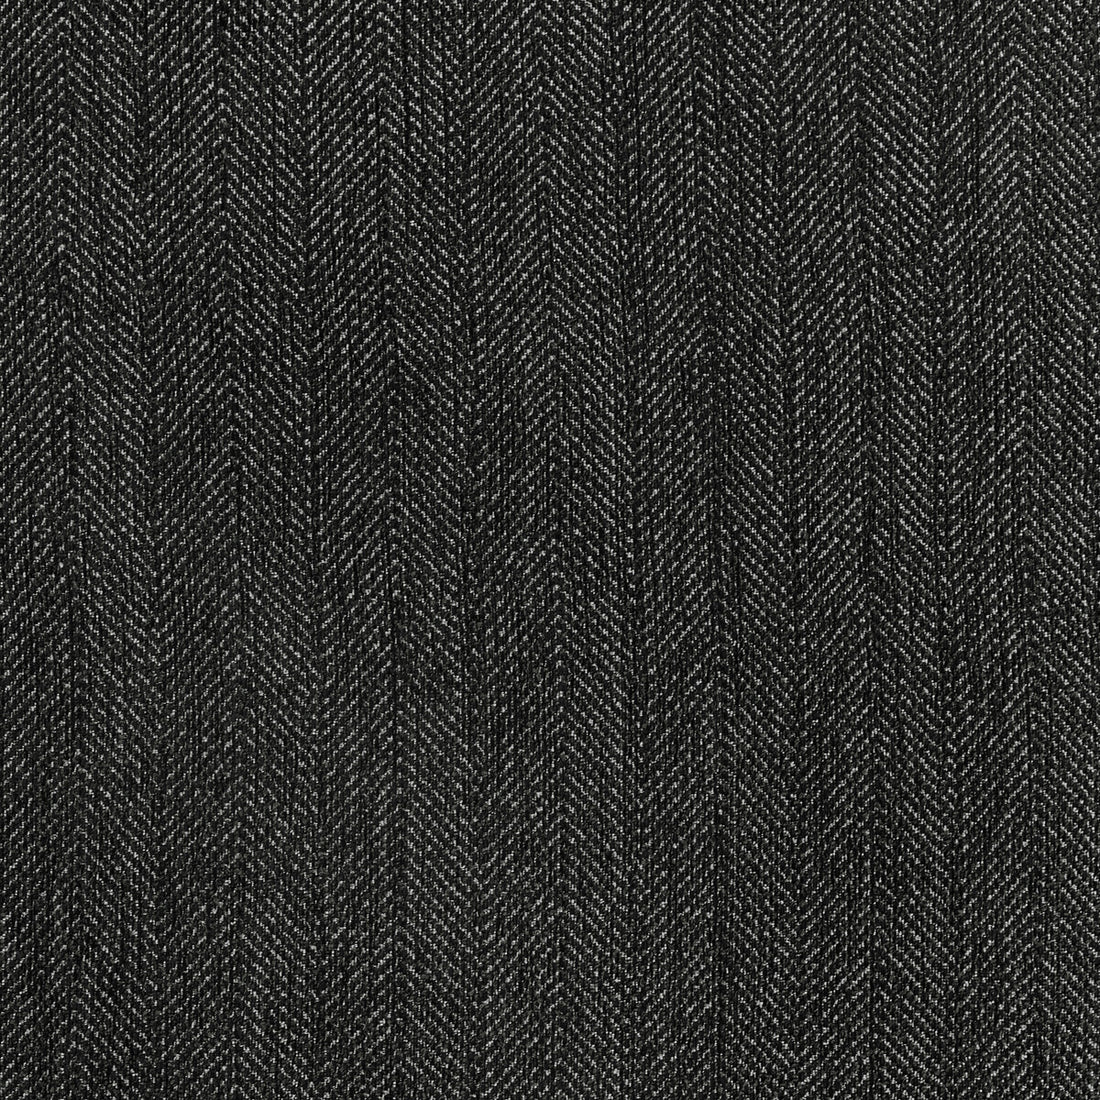 Healing Touch fabric in black tie color - pattern 36389.8.0 - by Kravet Design in the Crypton Home - Celliant collection